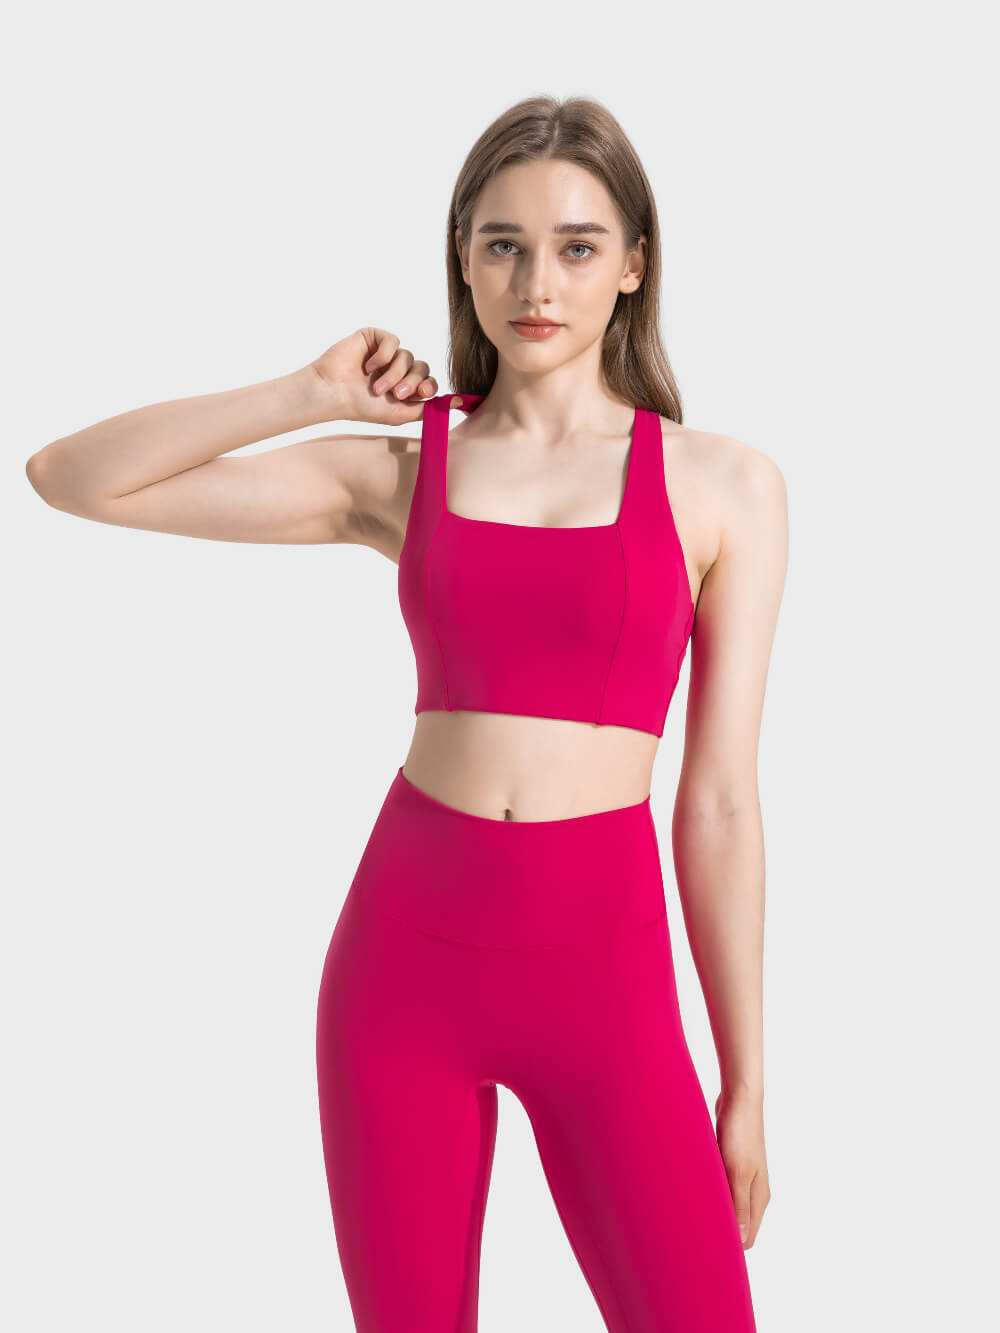 Nepoagym Plus Size Yoga High Waisted Running Leggings High Waist Sport  Pants In Naked Feel XXS To XL From Mengyang10, $19.47